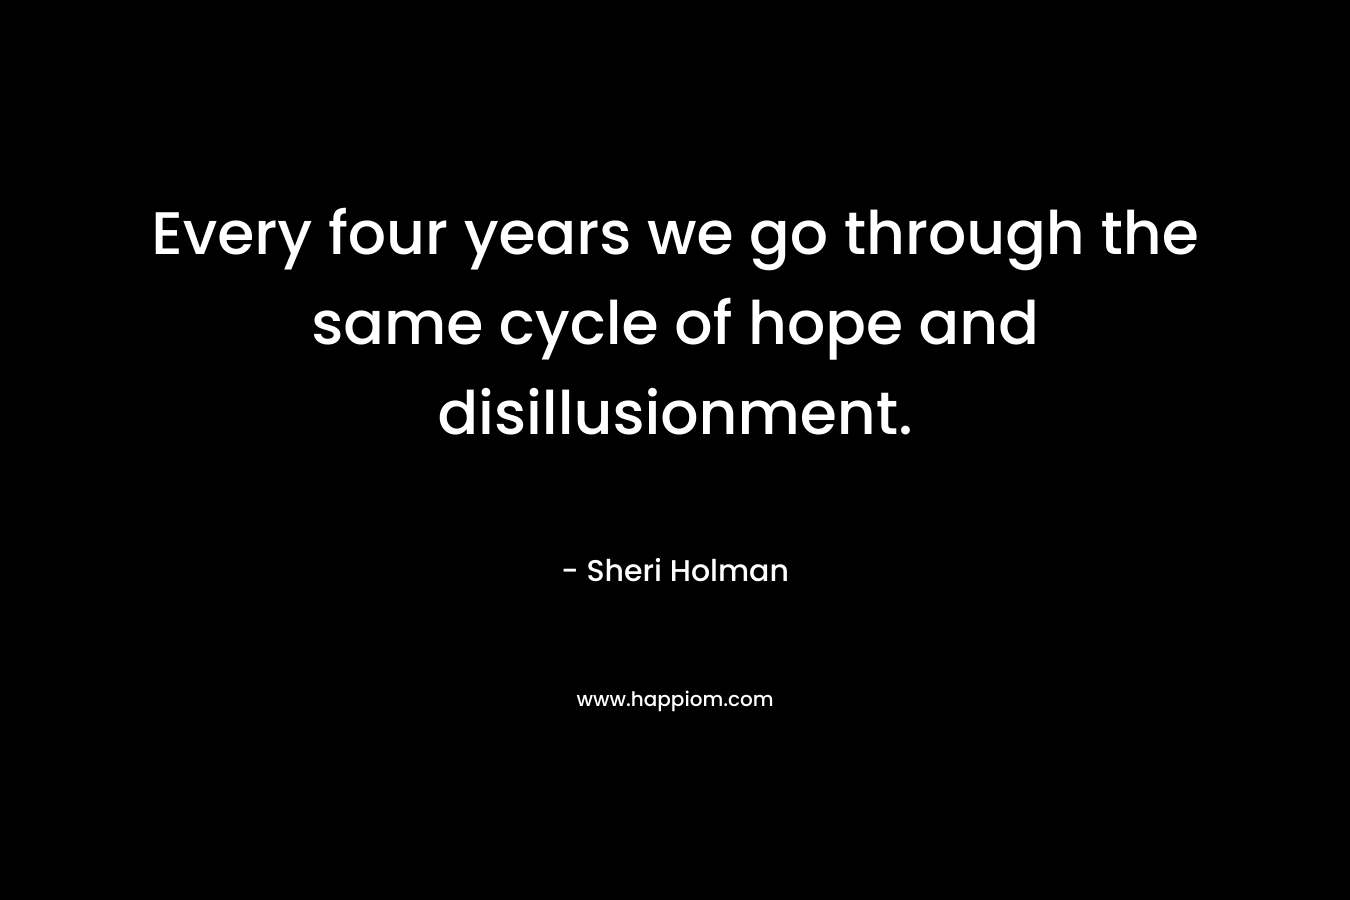 Every four years we go through the same cycle of hope and disillusionment. – Sheri Holman